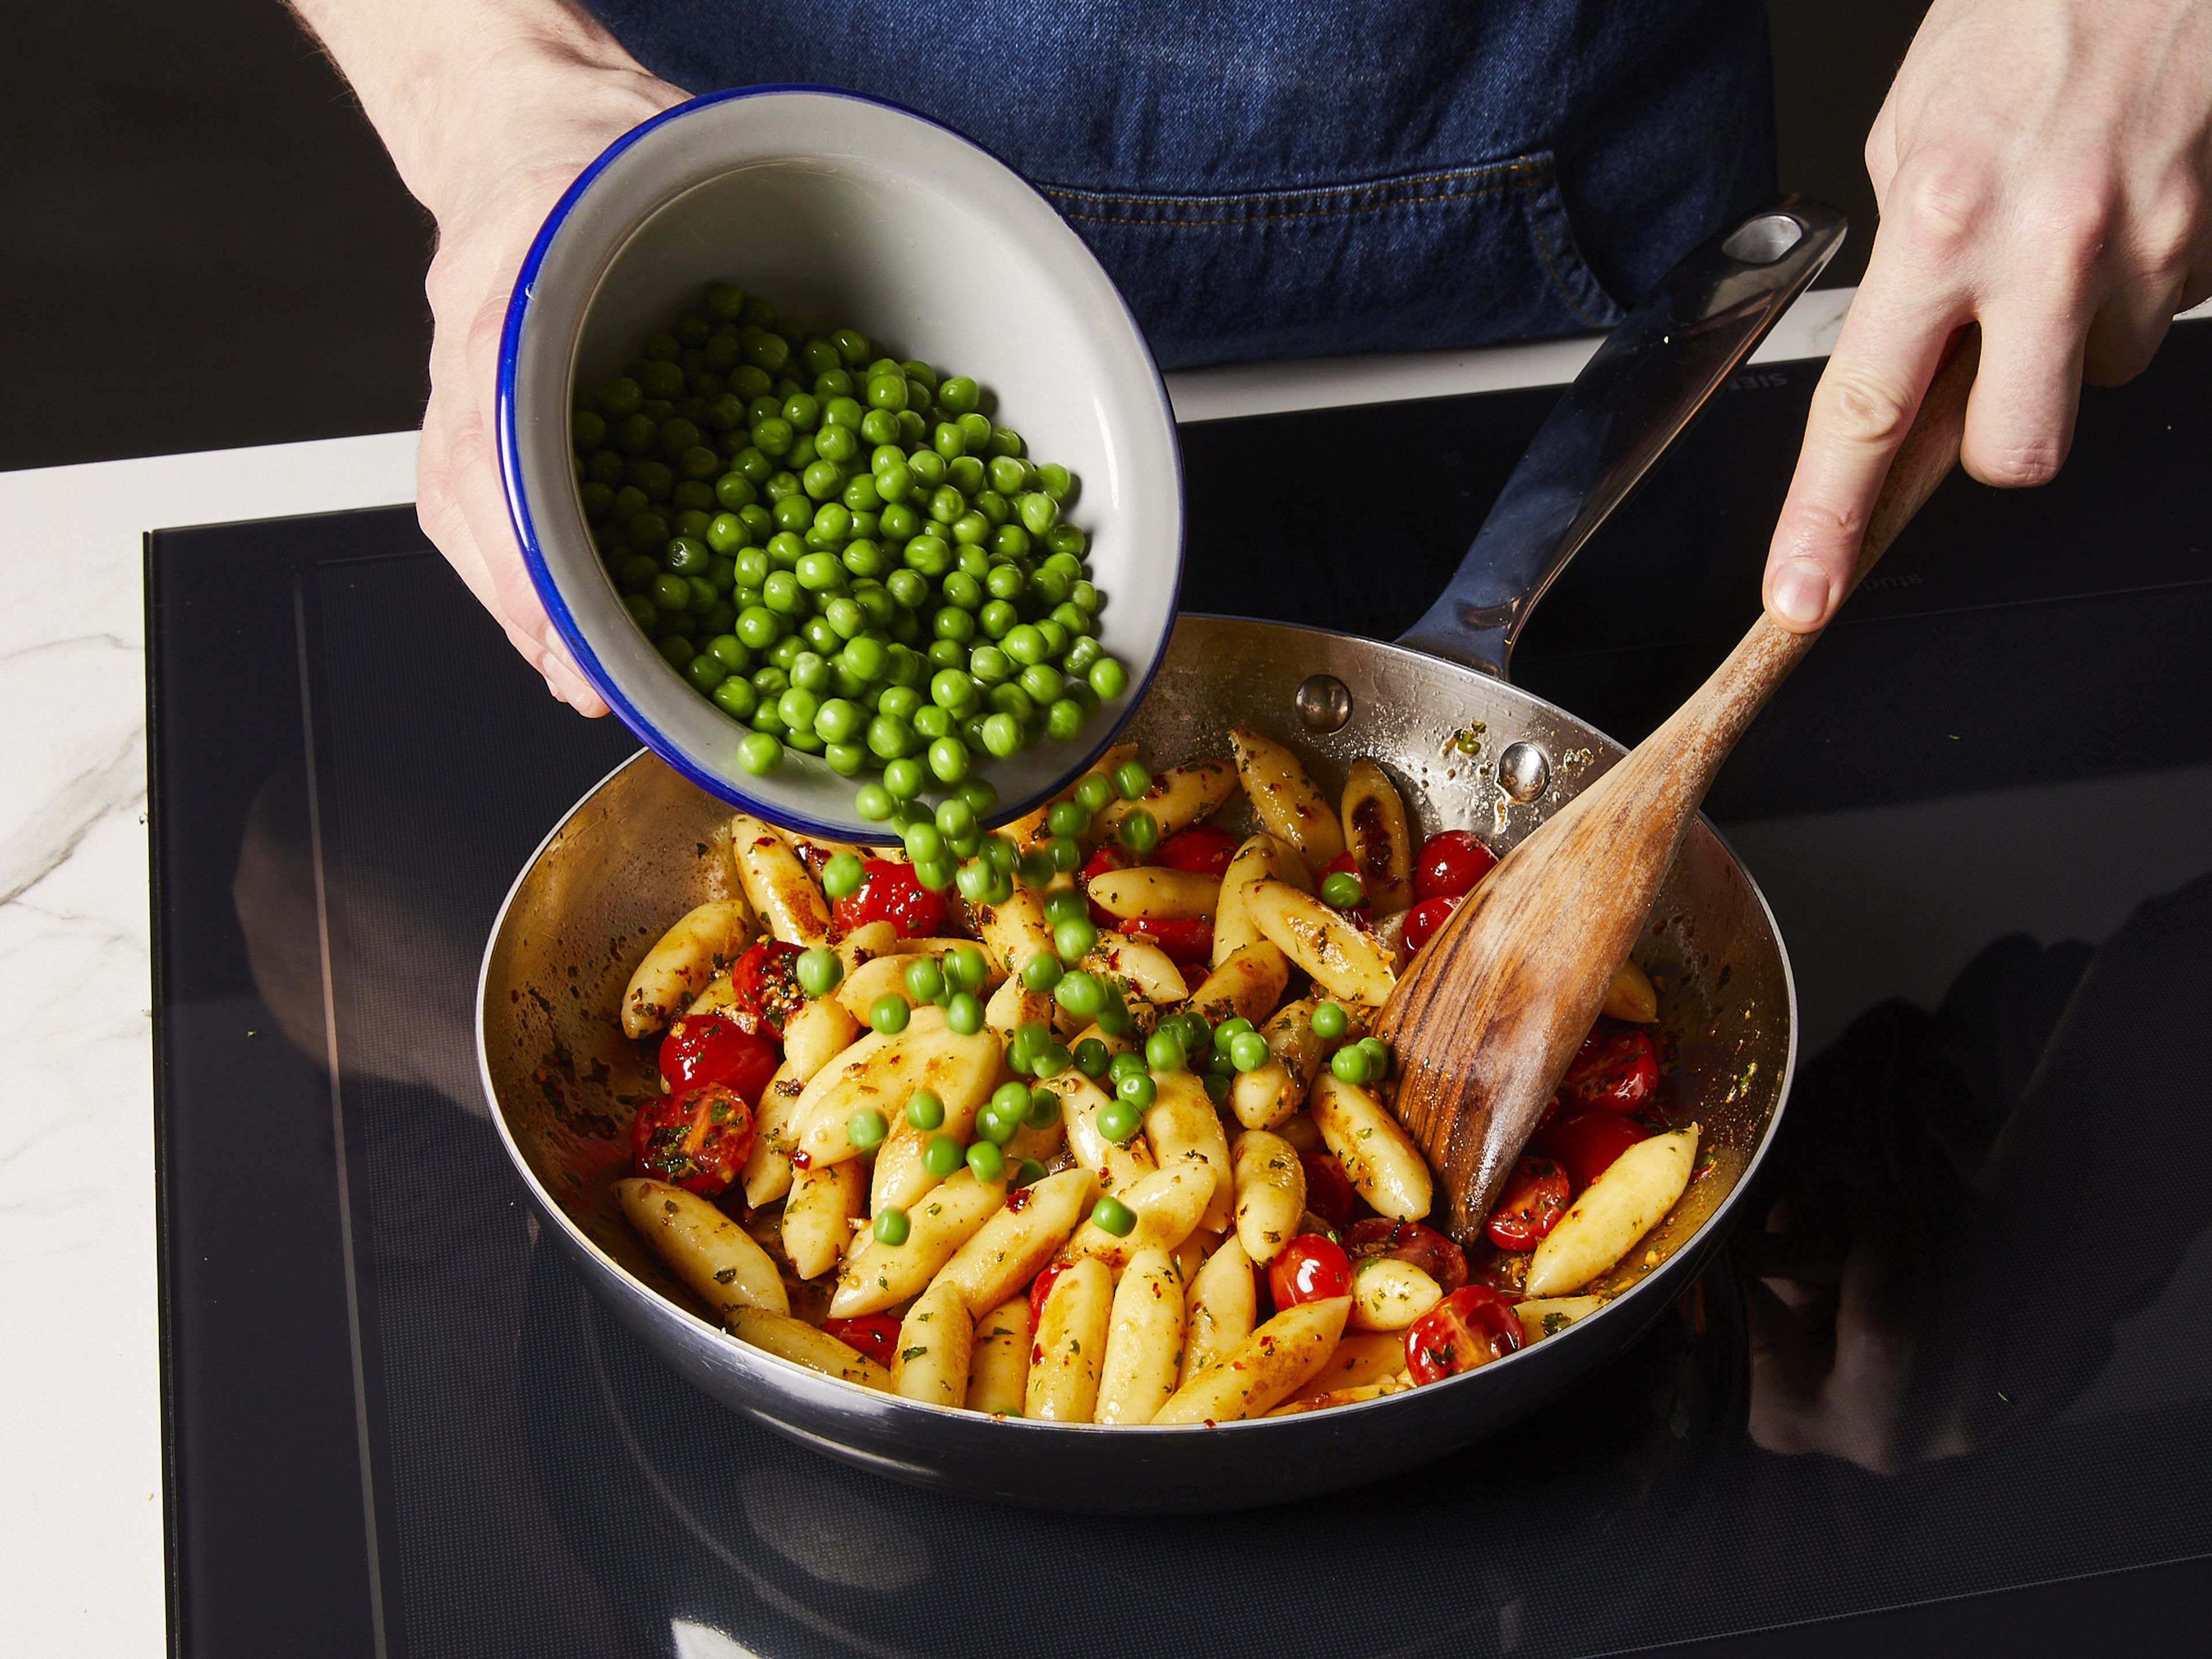 Add in the German gnocchi, cherry tomatoes, and peas. Sauté for 2–3 min. until tomatoes are slightly soft. Serve with parmesan to your liking on top.